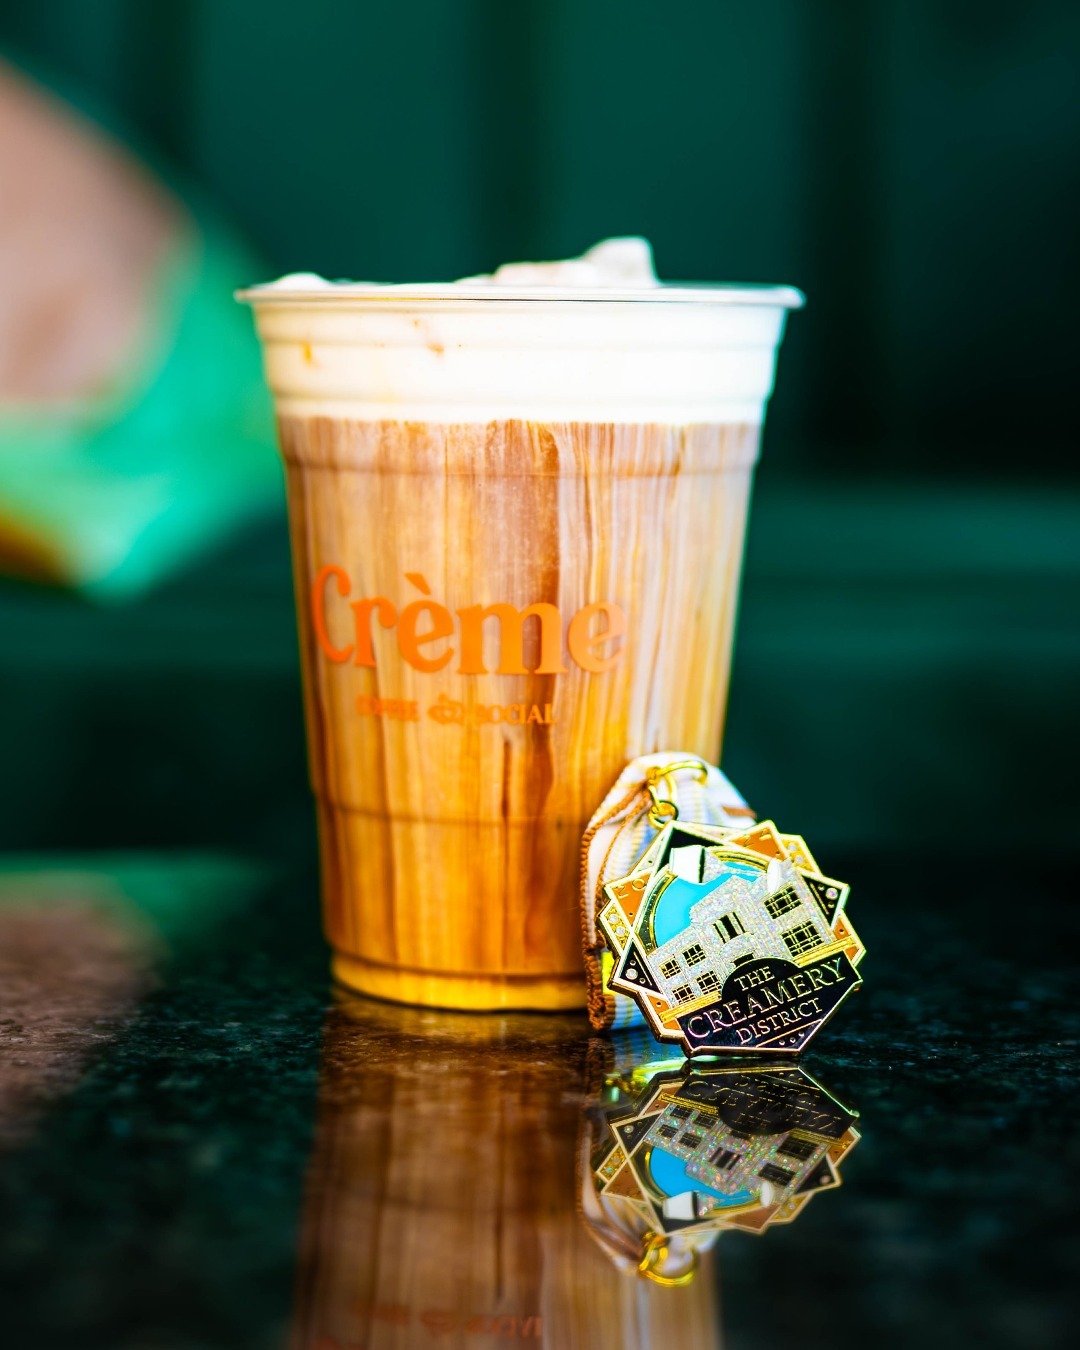 Purchase any of our iced coffee options and you can get our @thecreamerysatx medal for $2. 🎖️

Available through April 28th or until sell out.